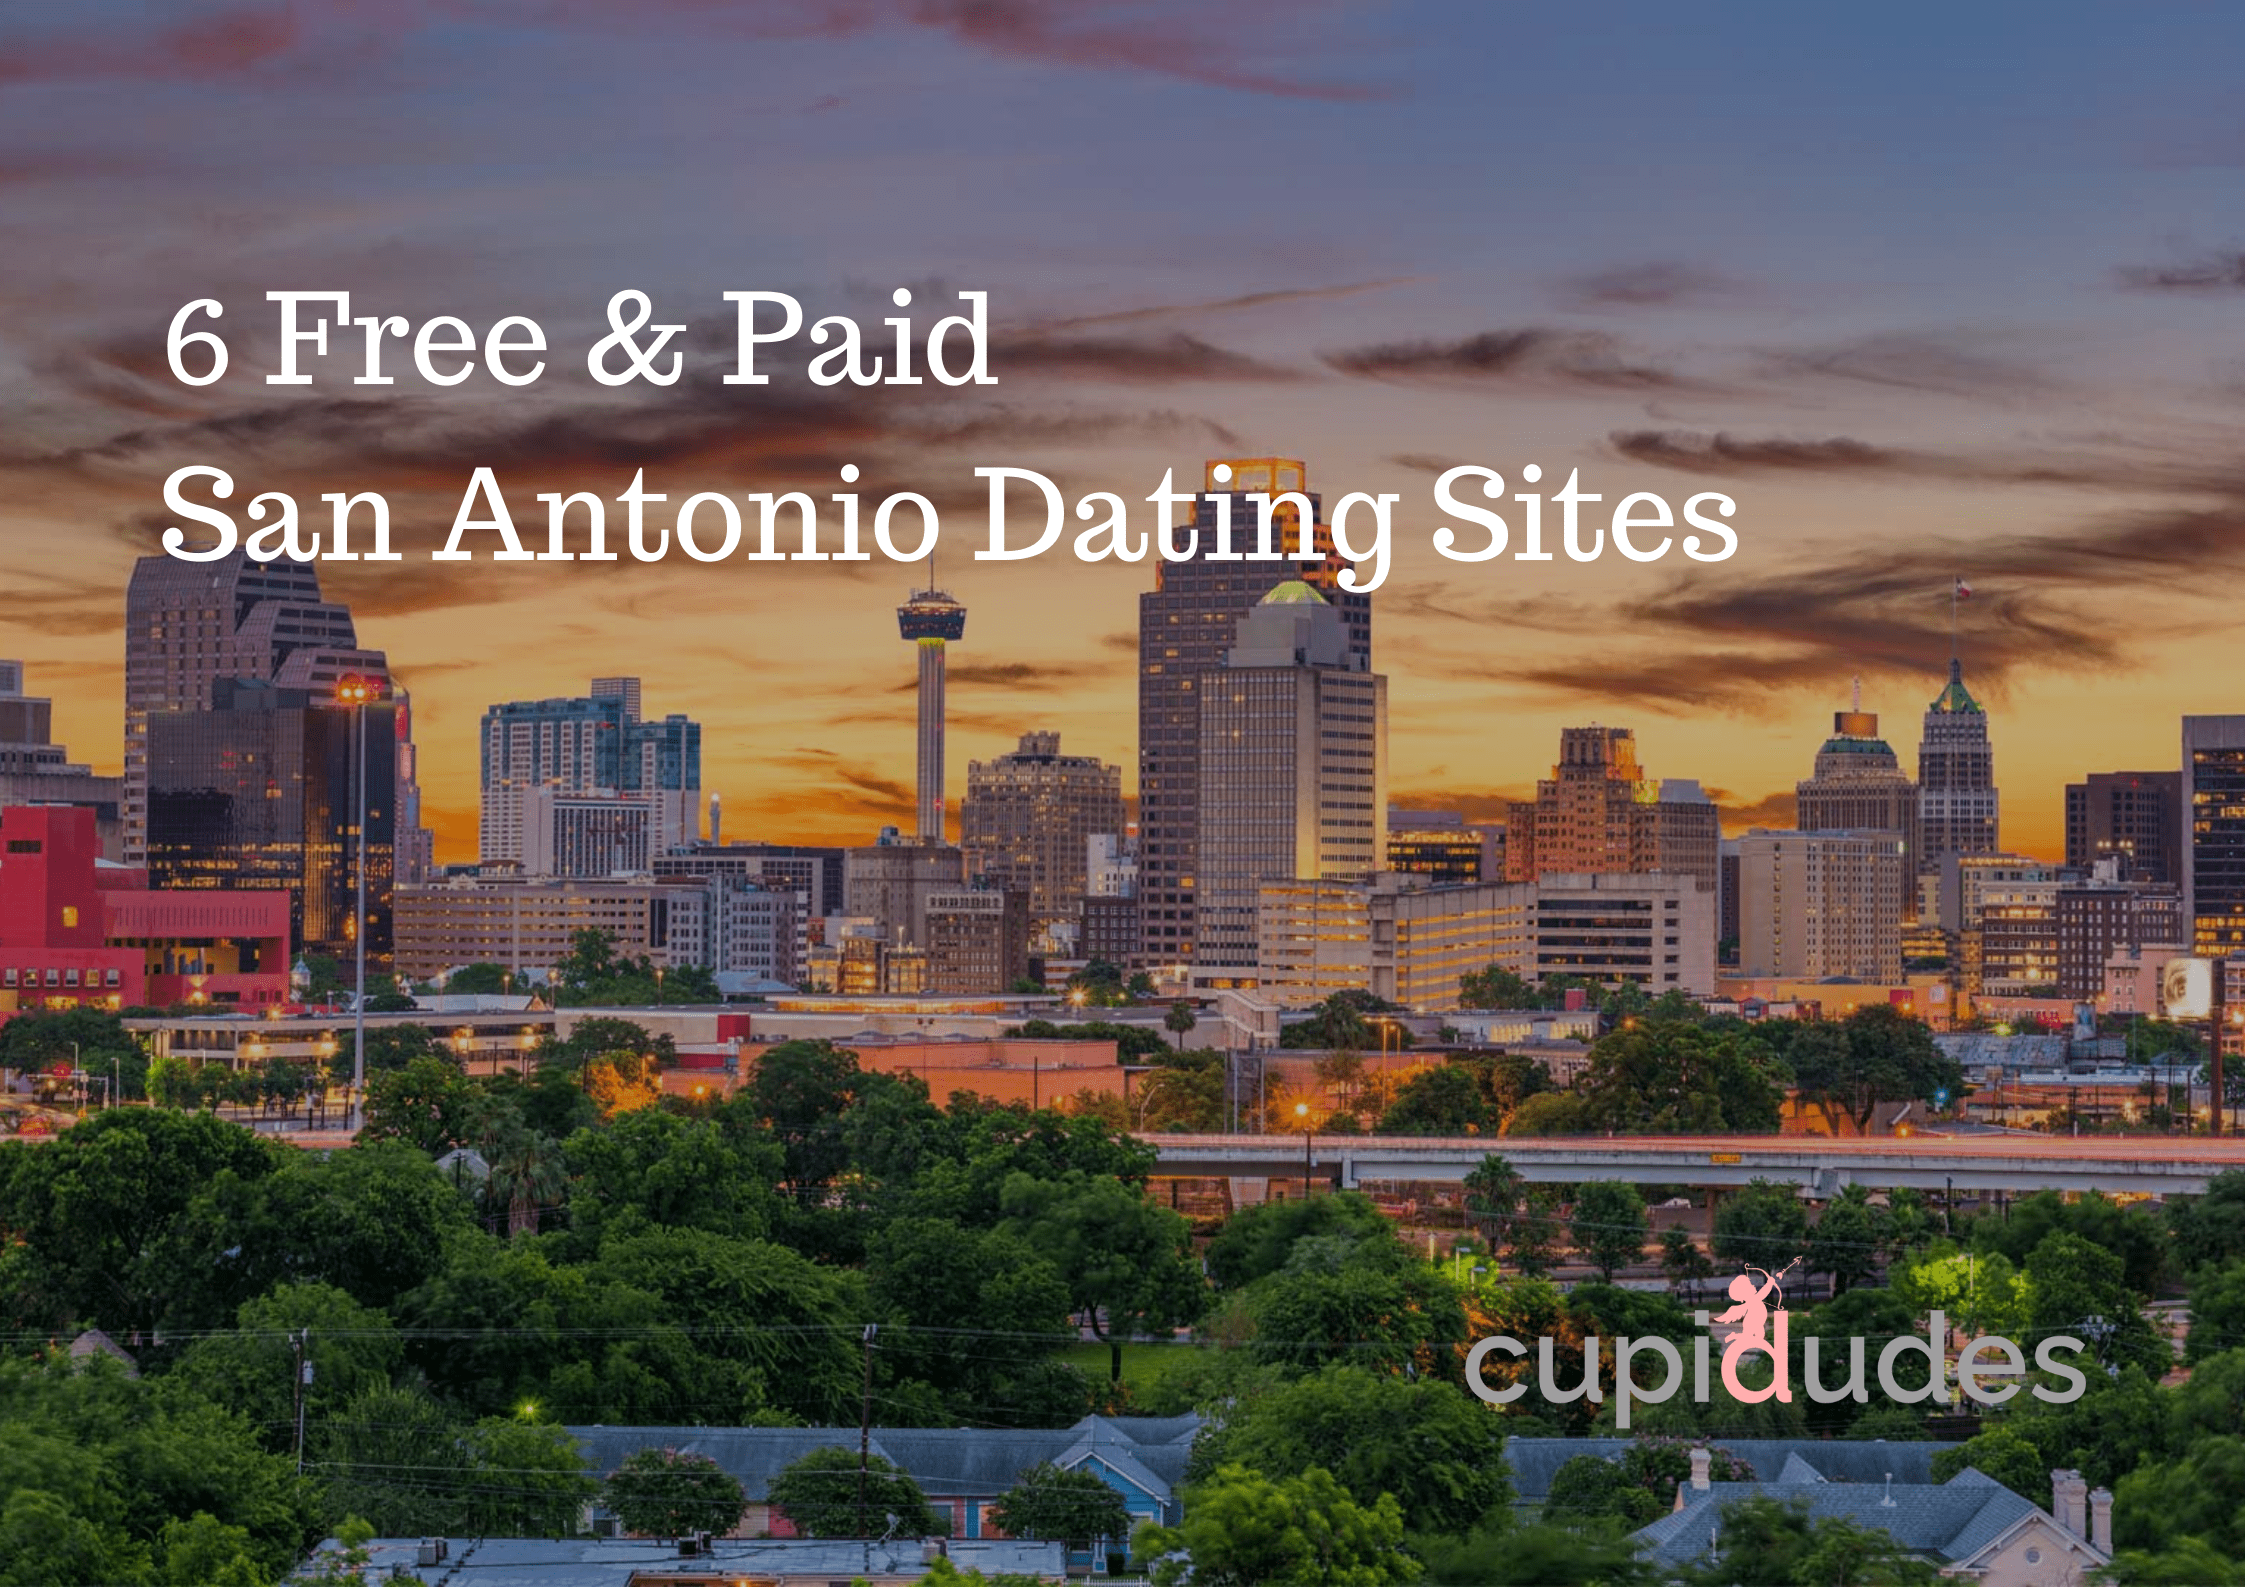 Dating exclusively in San Antonio